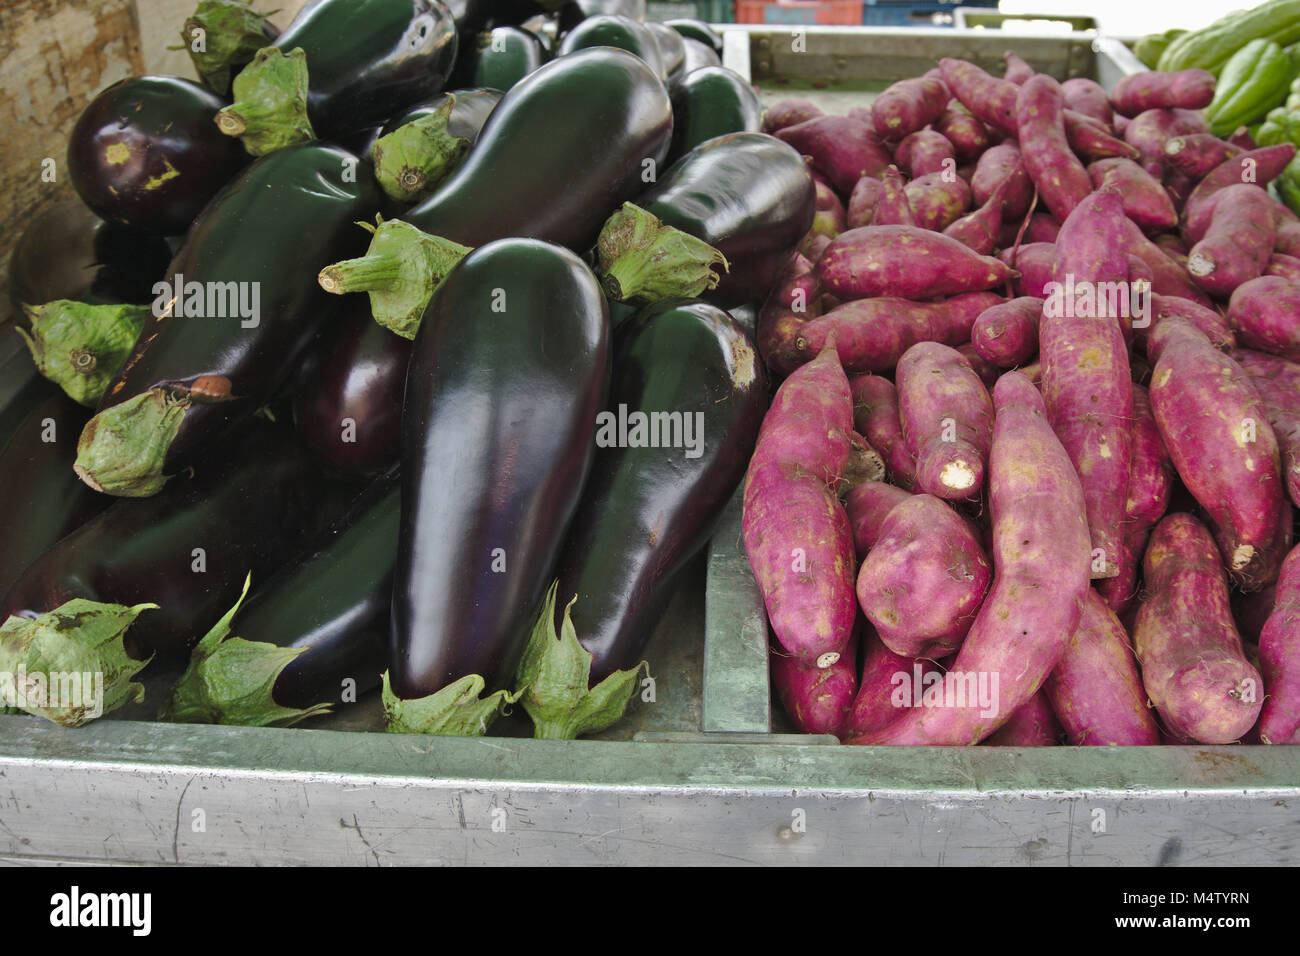 Red sweet potato and eggplant at a farmers market stall. Stock Photo